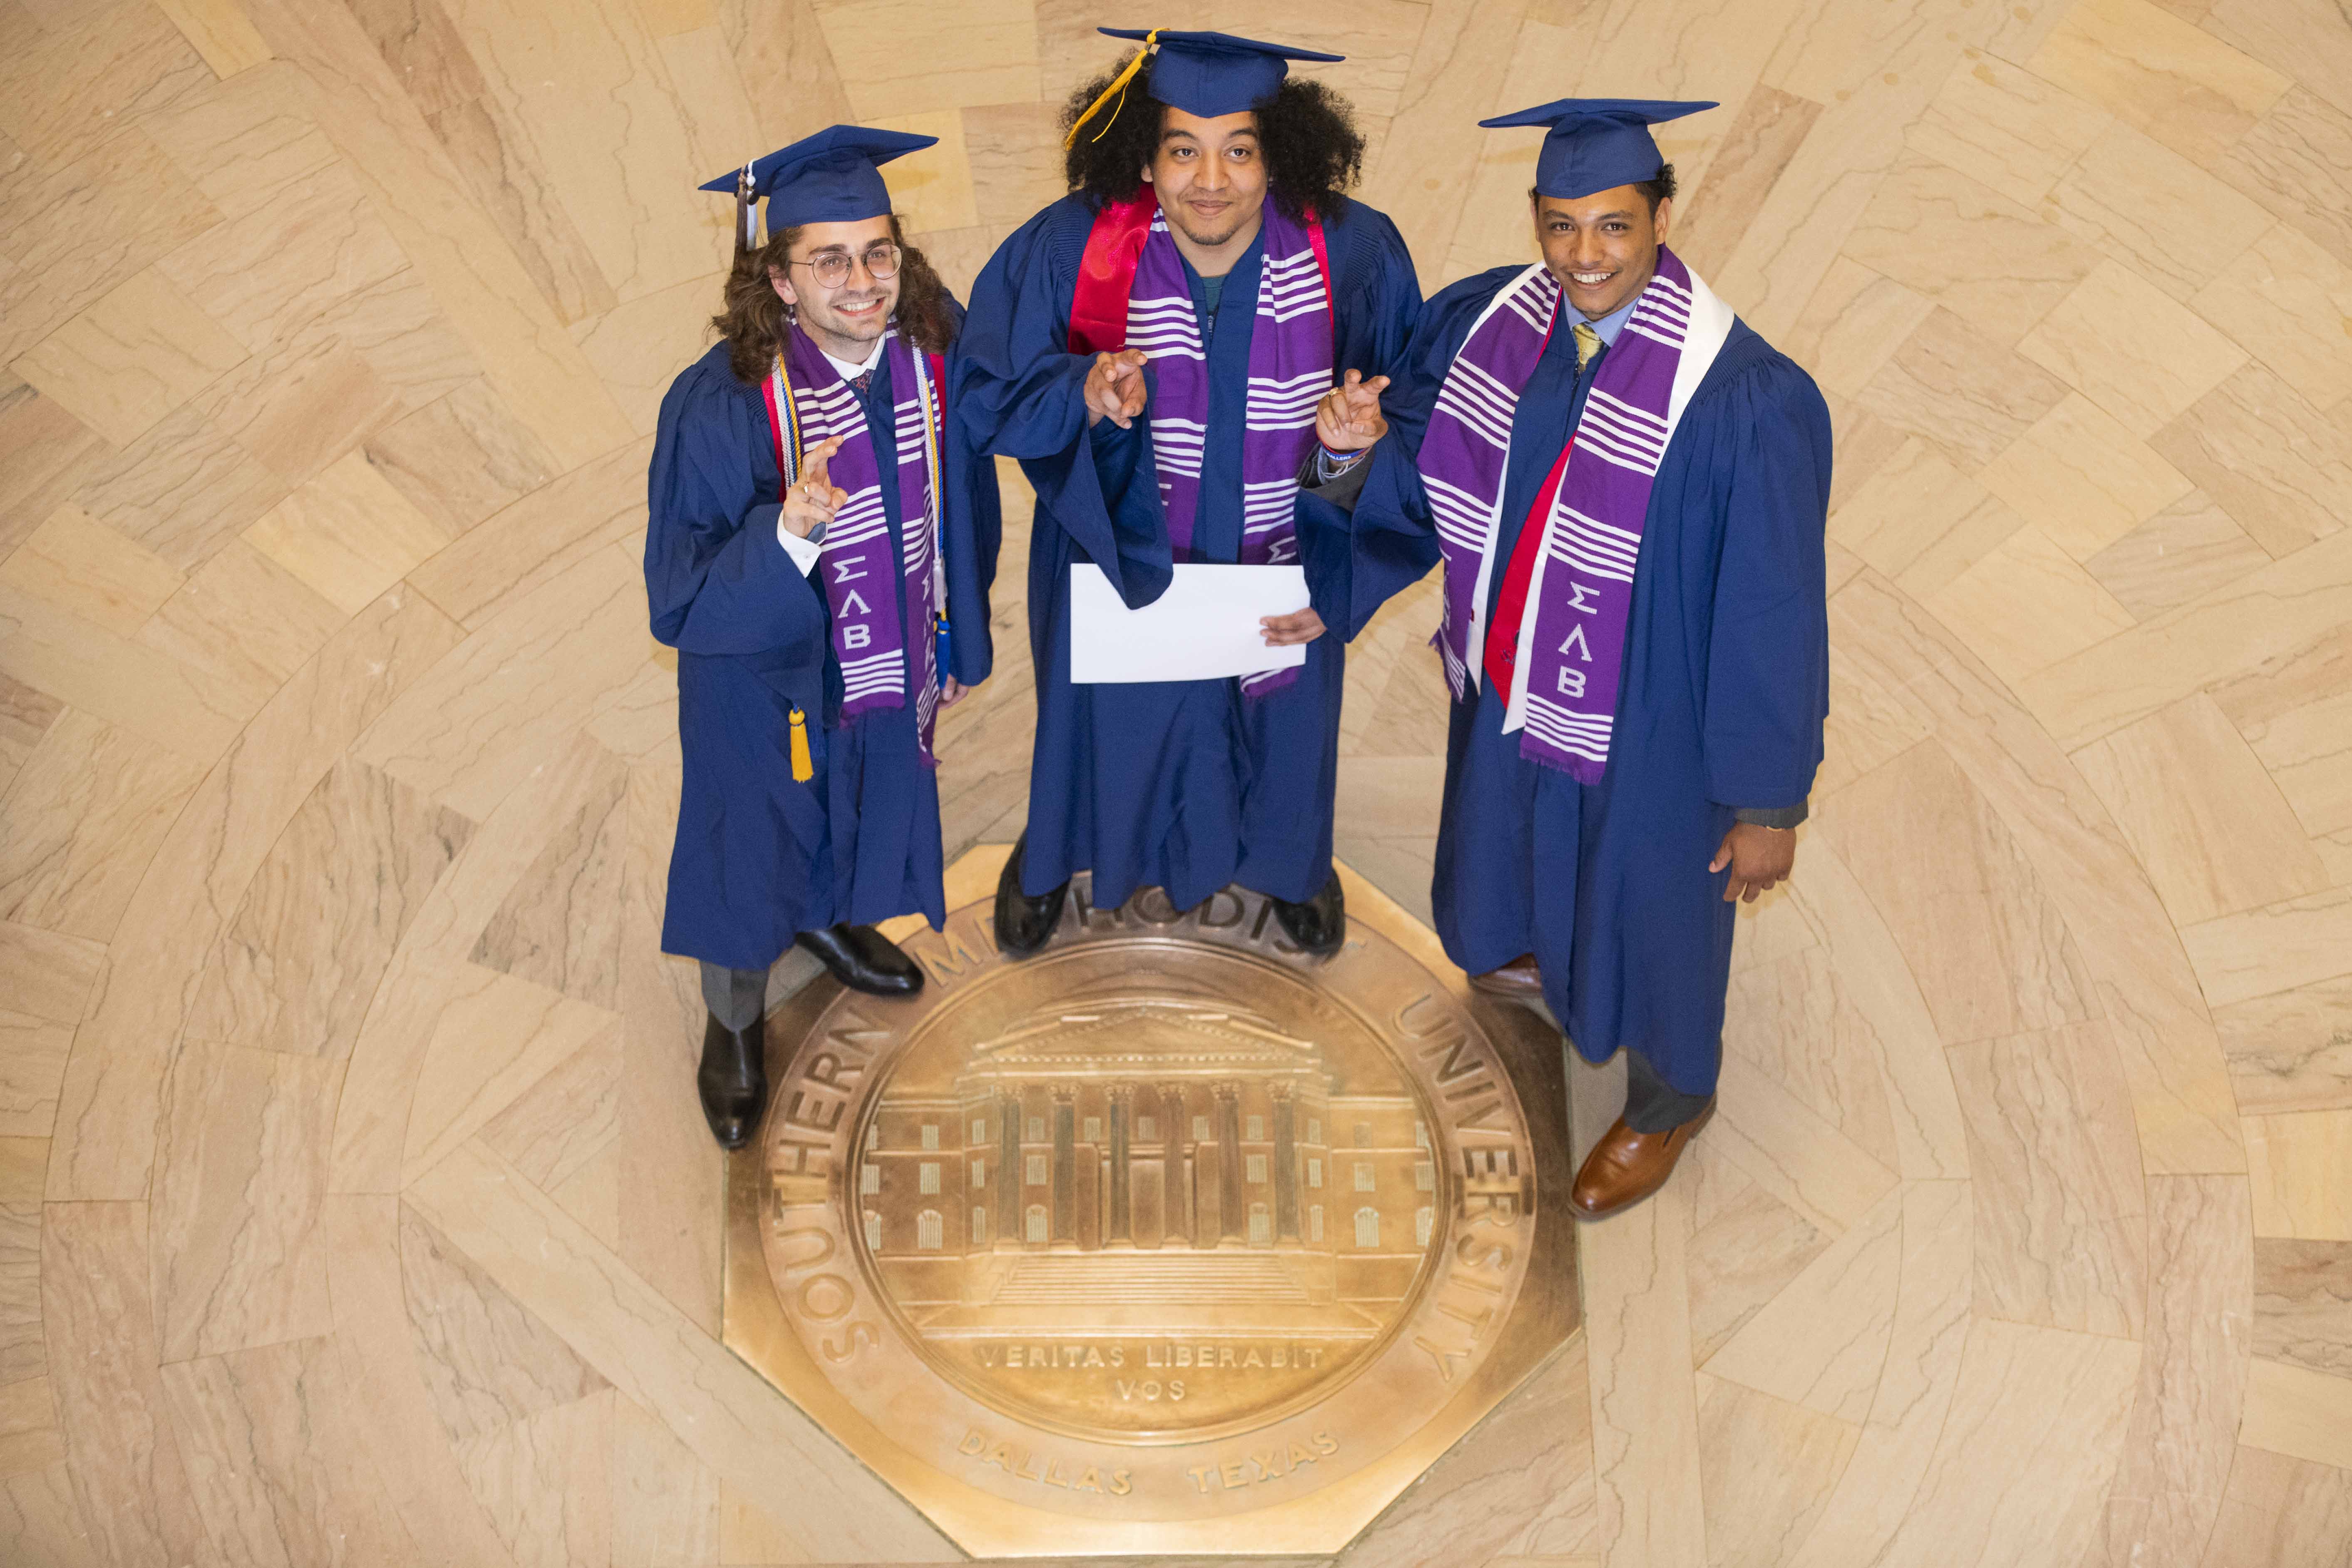 students standing on the university seal in the Dallas hall rotunda